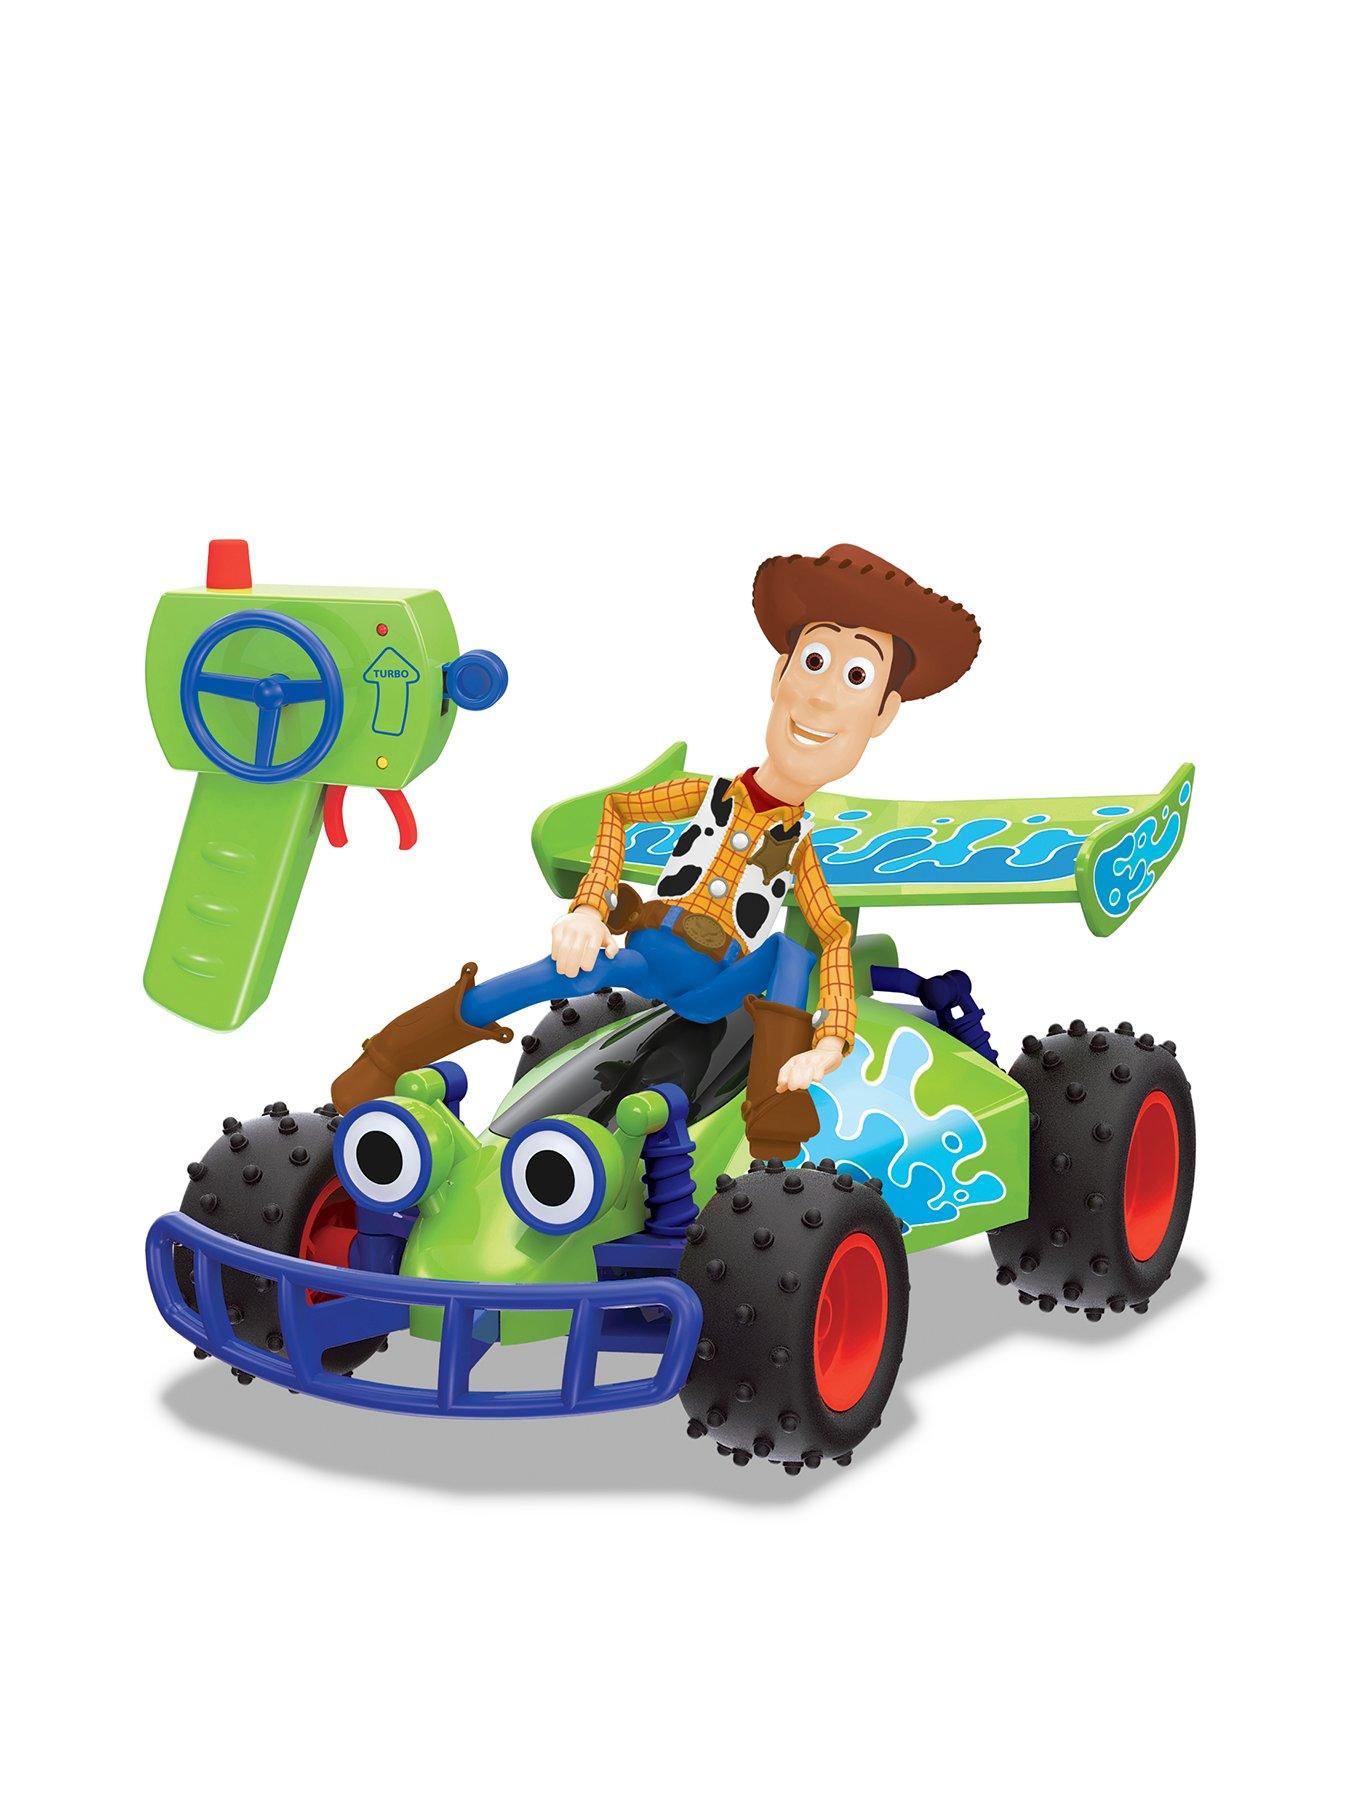 toy story rc buggy